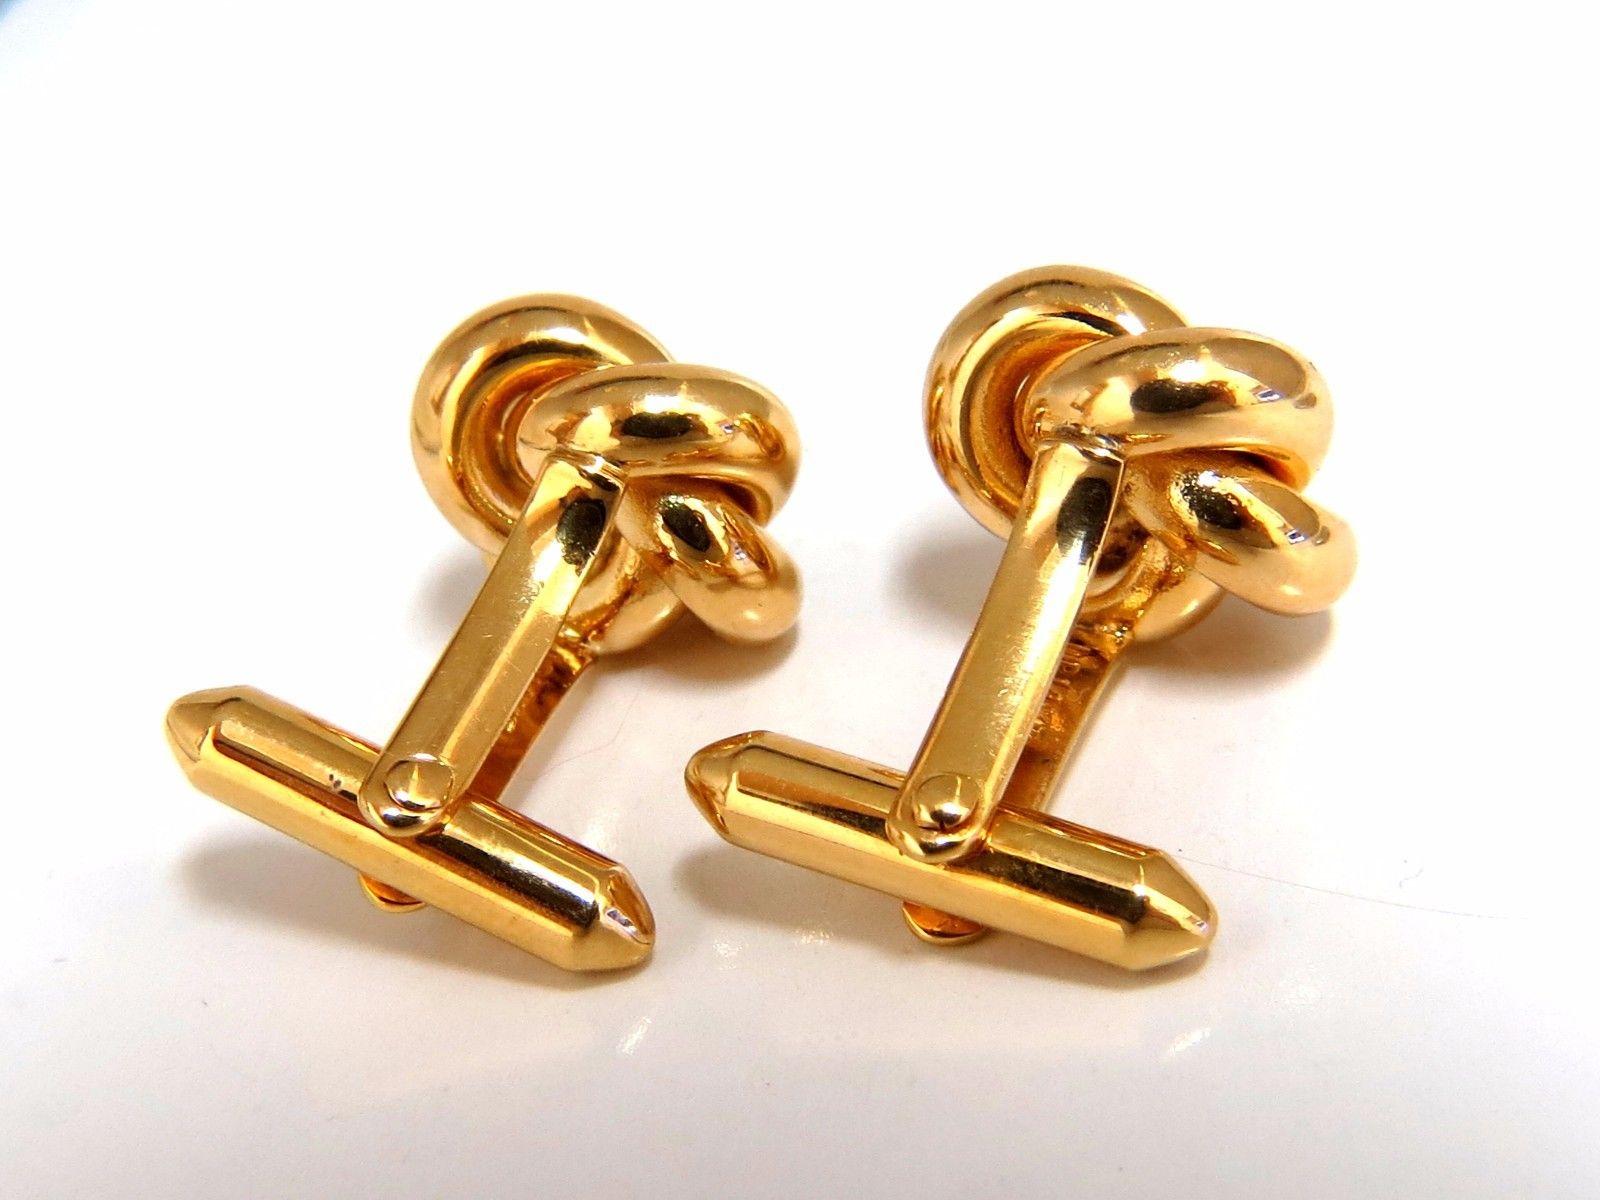 Executive Prime.

Hollow Knot Twist Cufflinks.

Amazing detail / hand crafted

Embossed / Raised 3D  Knot Design

marked 14kt.

9.6 grams.

Top Measures: 13.6mm diamter

Depth: 7.2mm 